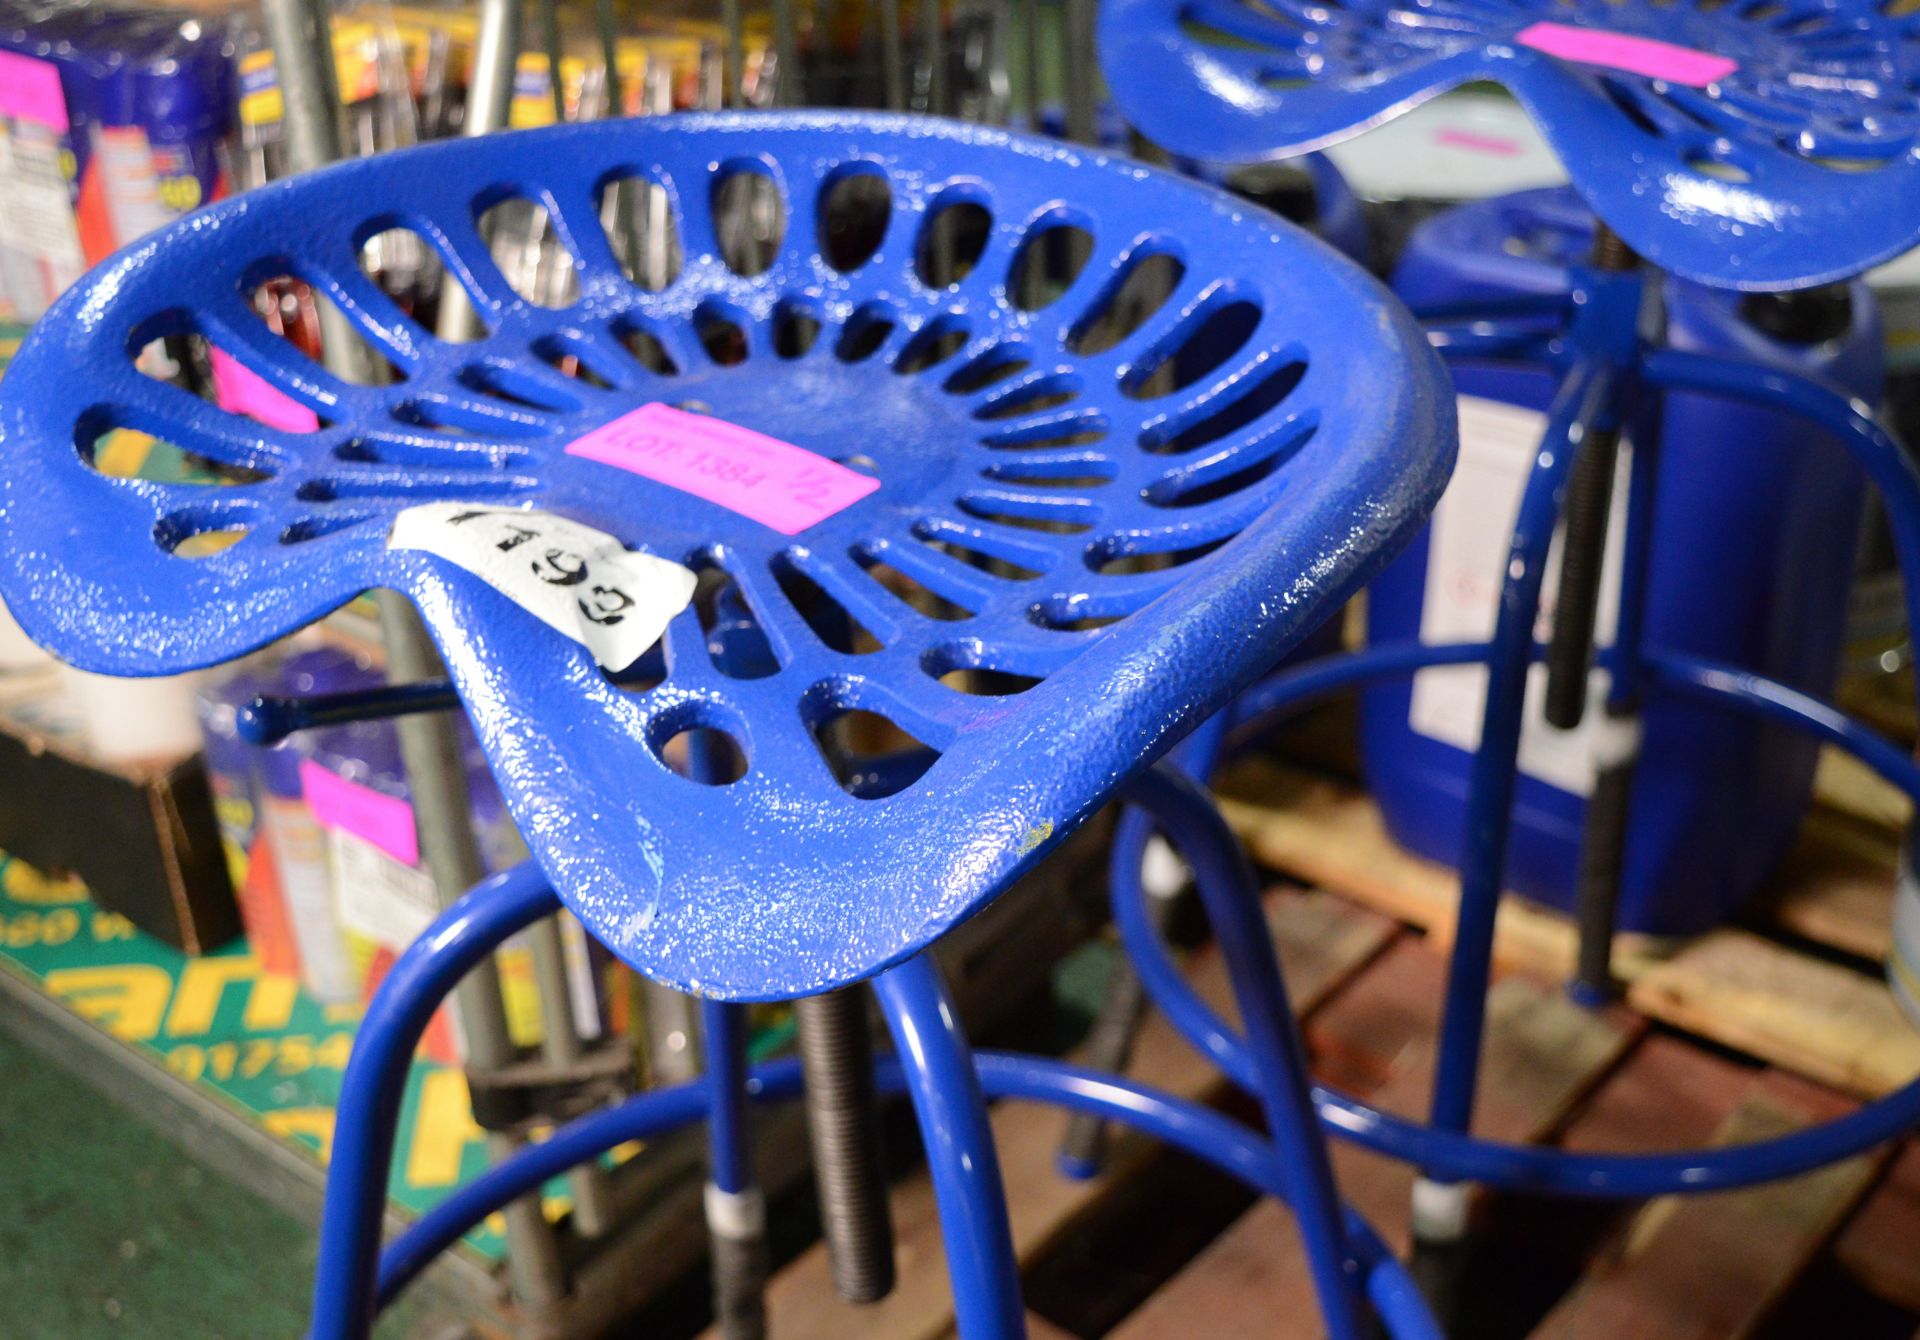 2x Cast Tractor Seat Stools - Blue. - Image 2 of 2